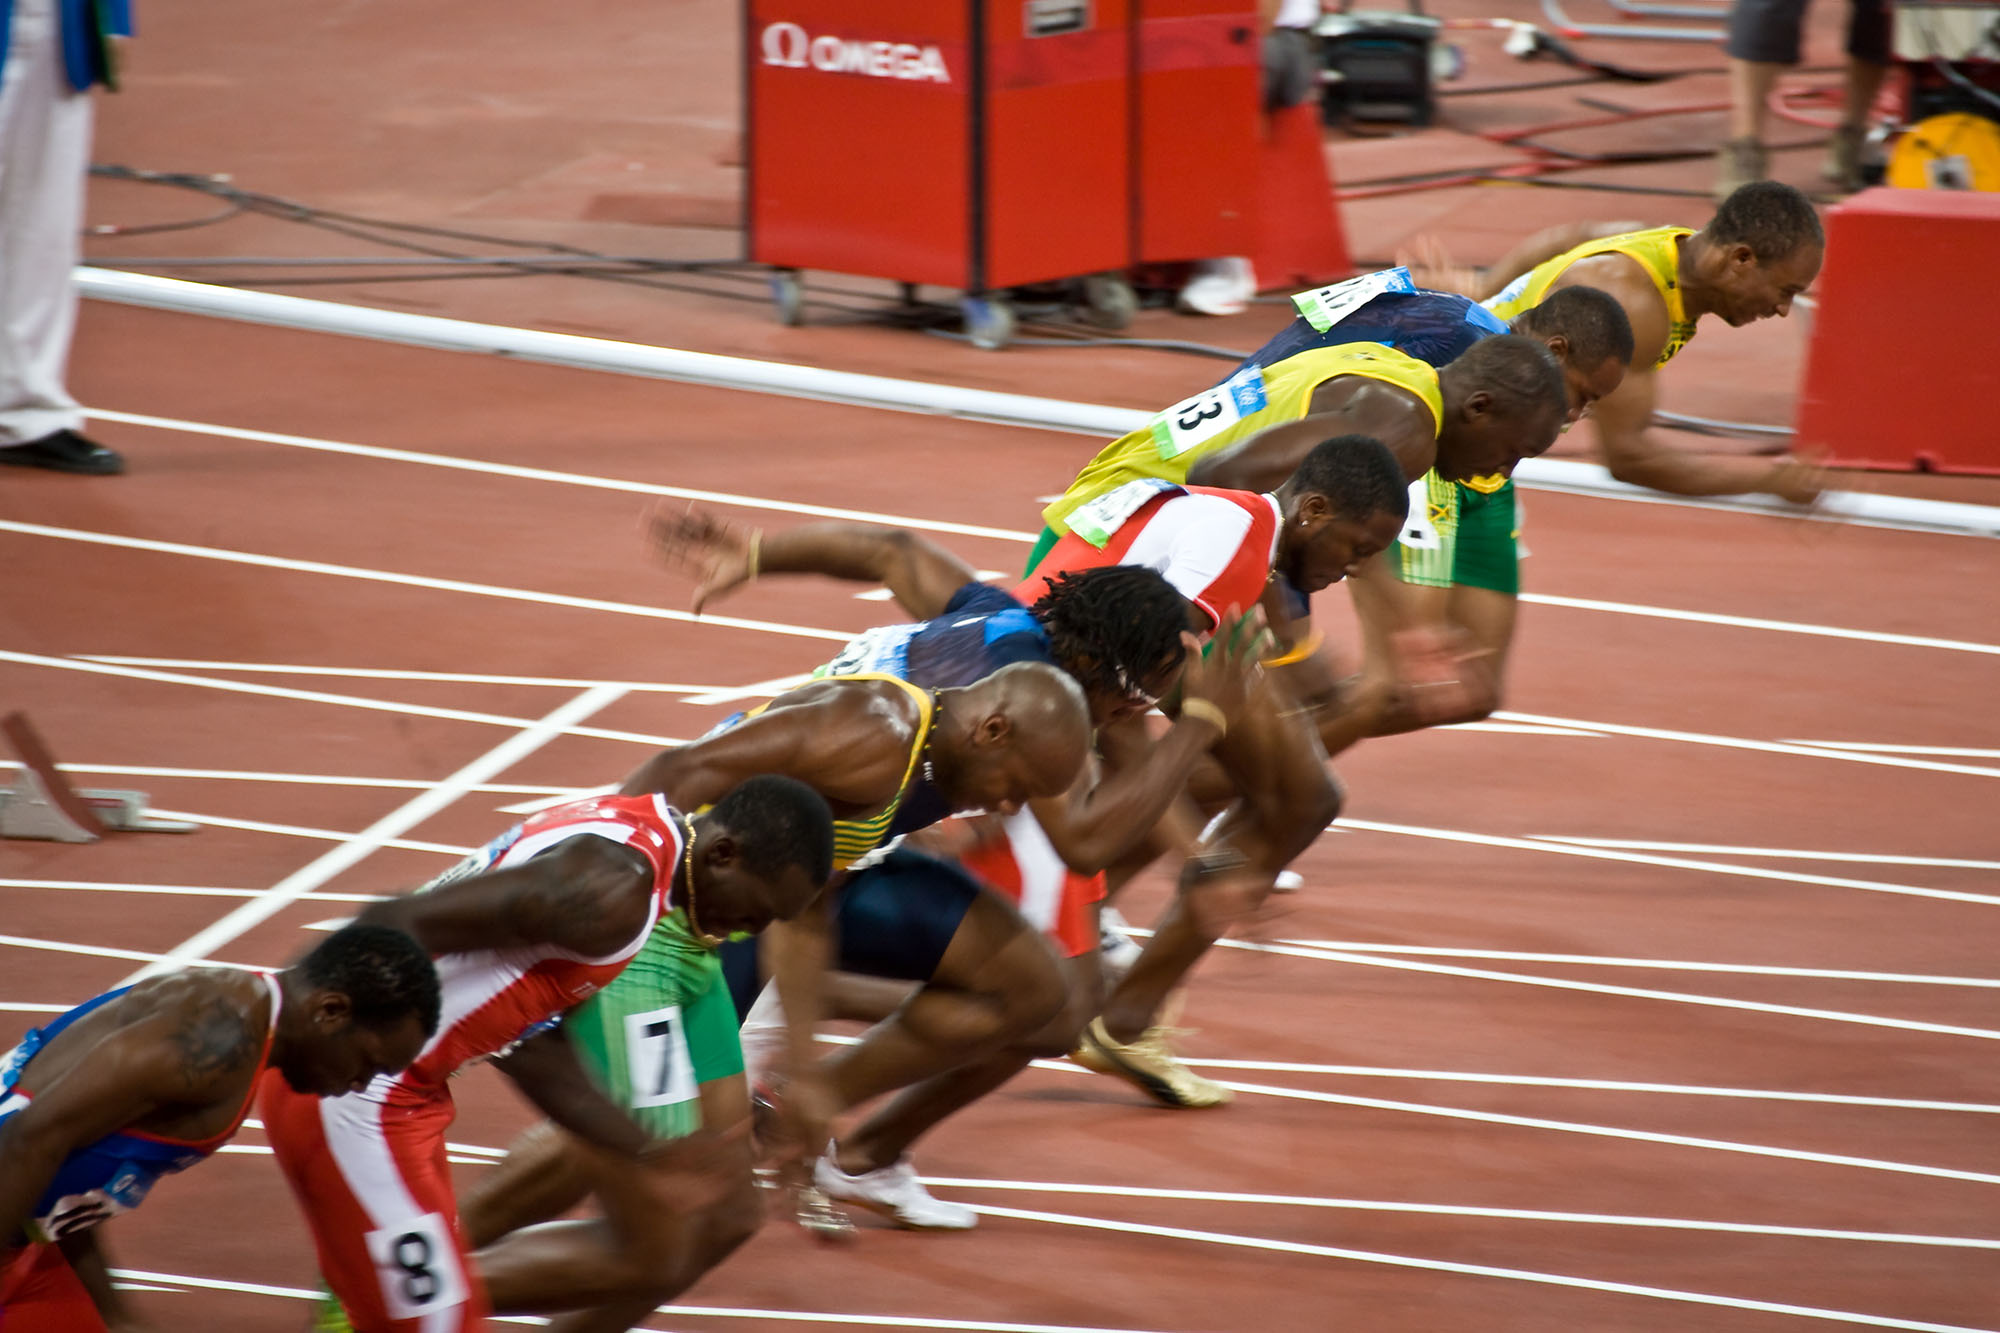 Sprinters Prehab | Get More out of Your Legs While Avoiding Injury